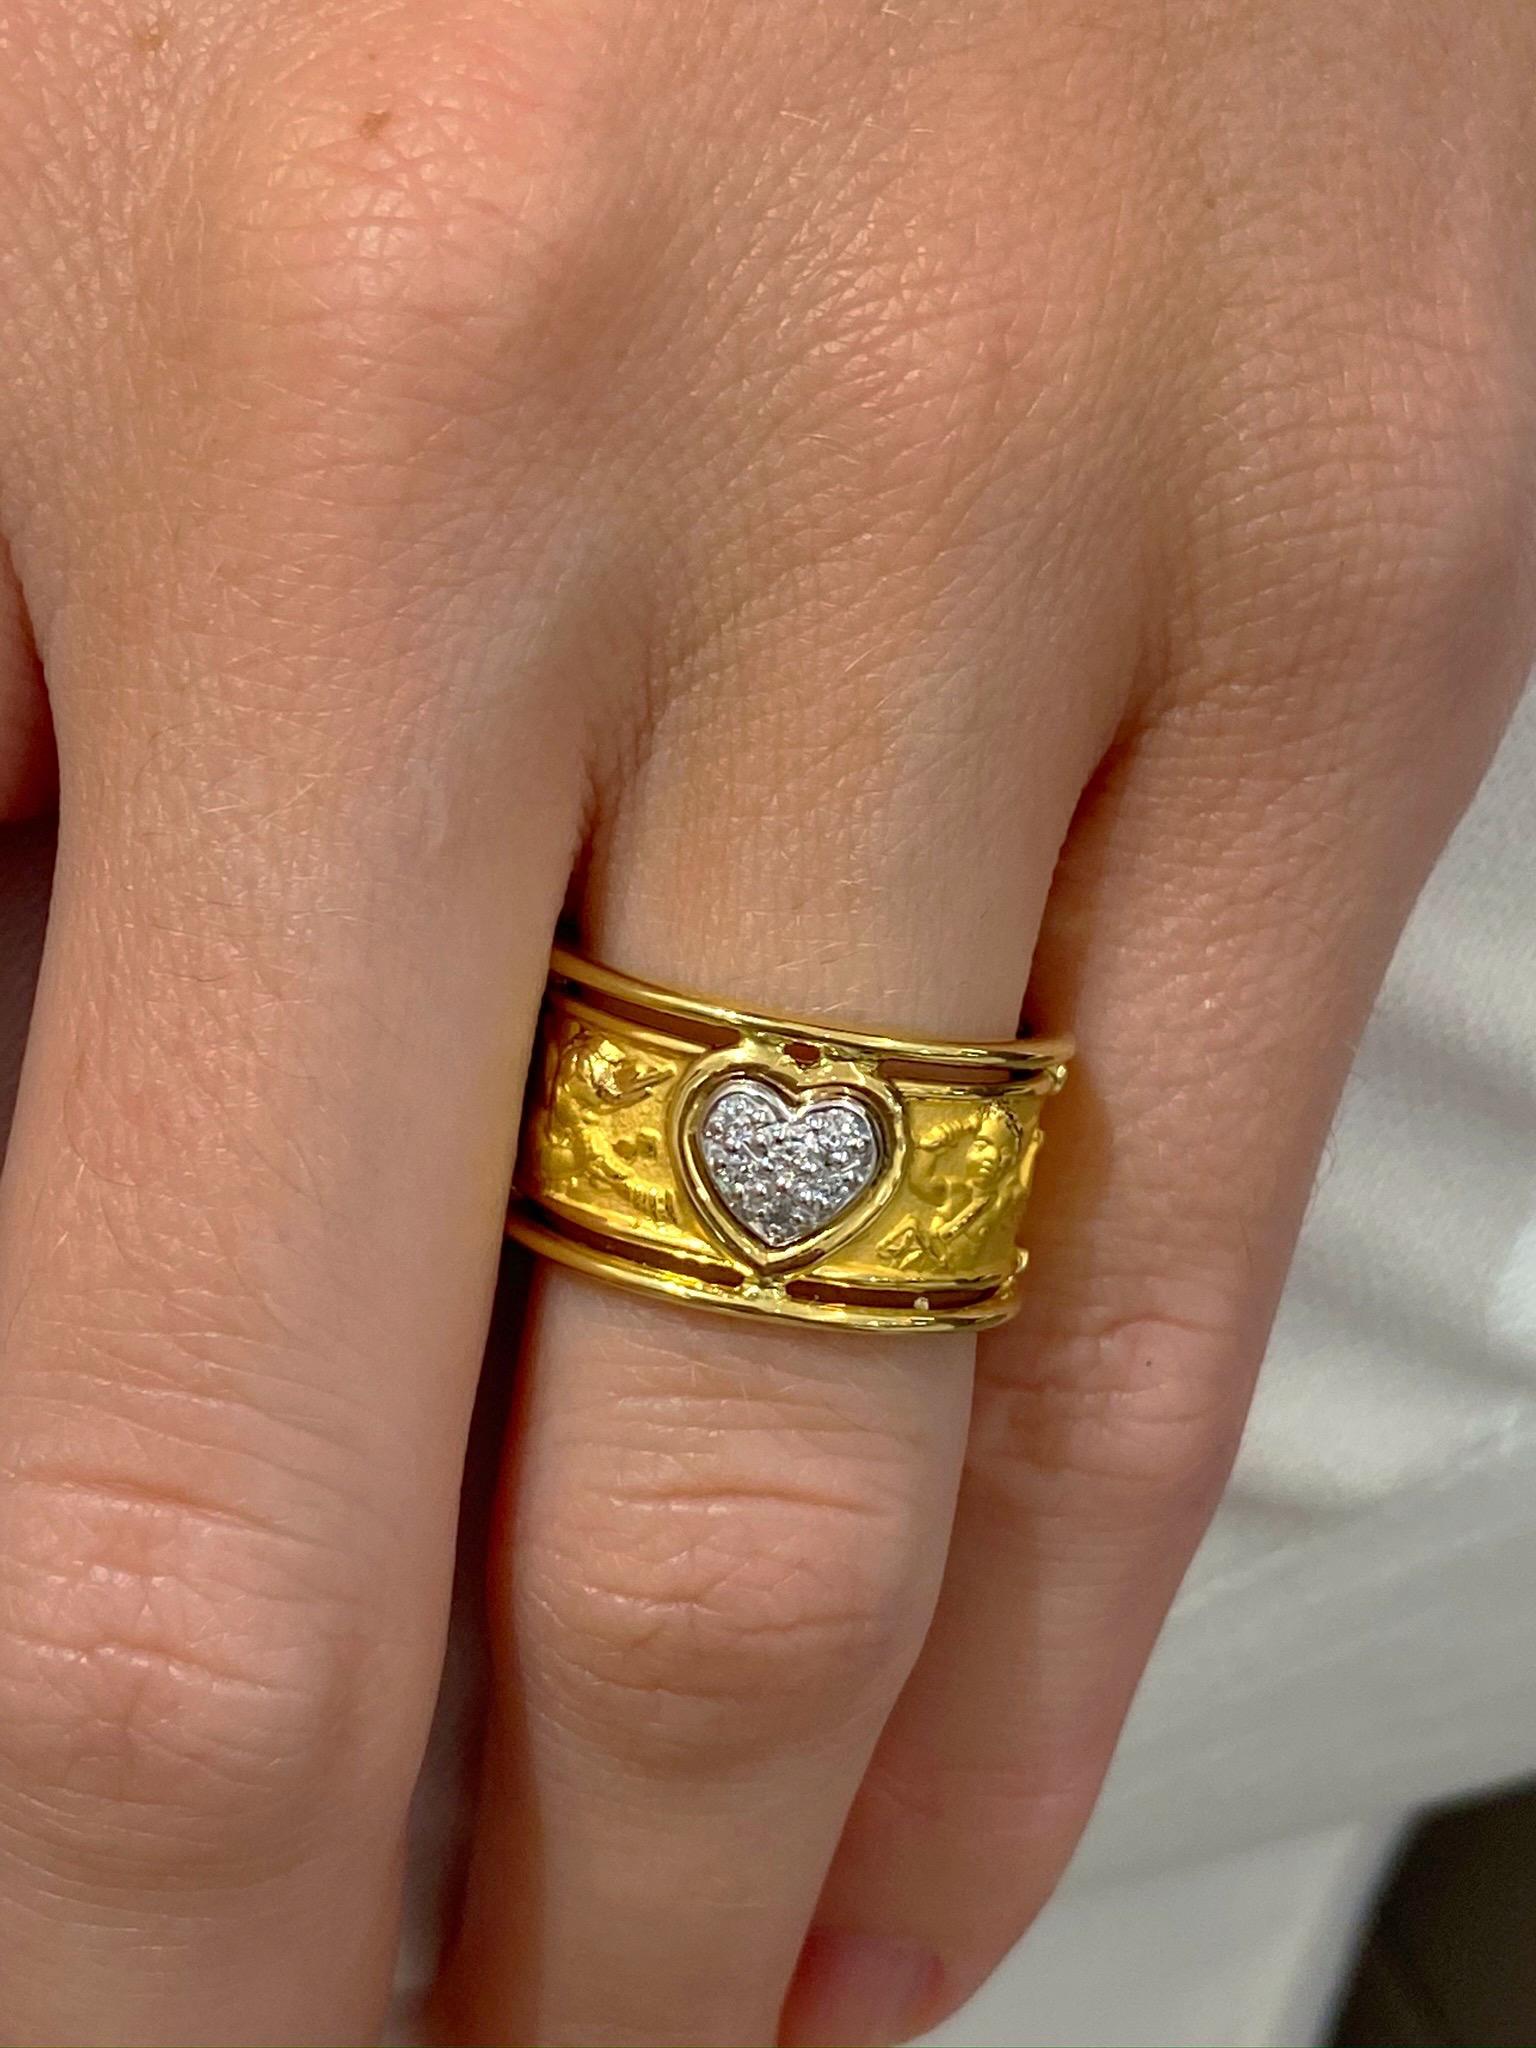 Carrera Y Carrera has built its famous name on figurative designs, an obsession with surface finishes, and a compelling way of seeing beauty in art and nature. This 18 karat yellow gold ring is a perfect example of Carrera's iconic designs. The band